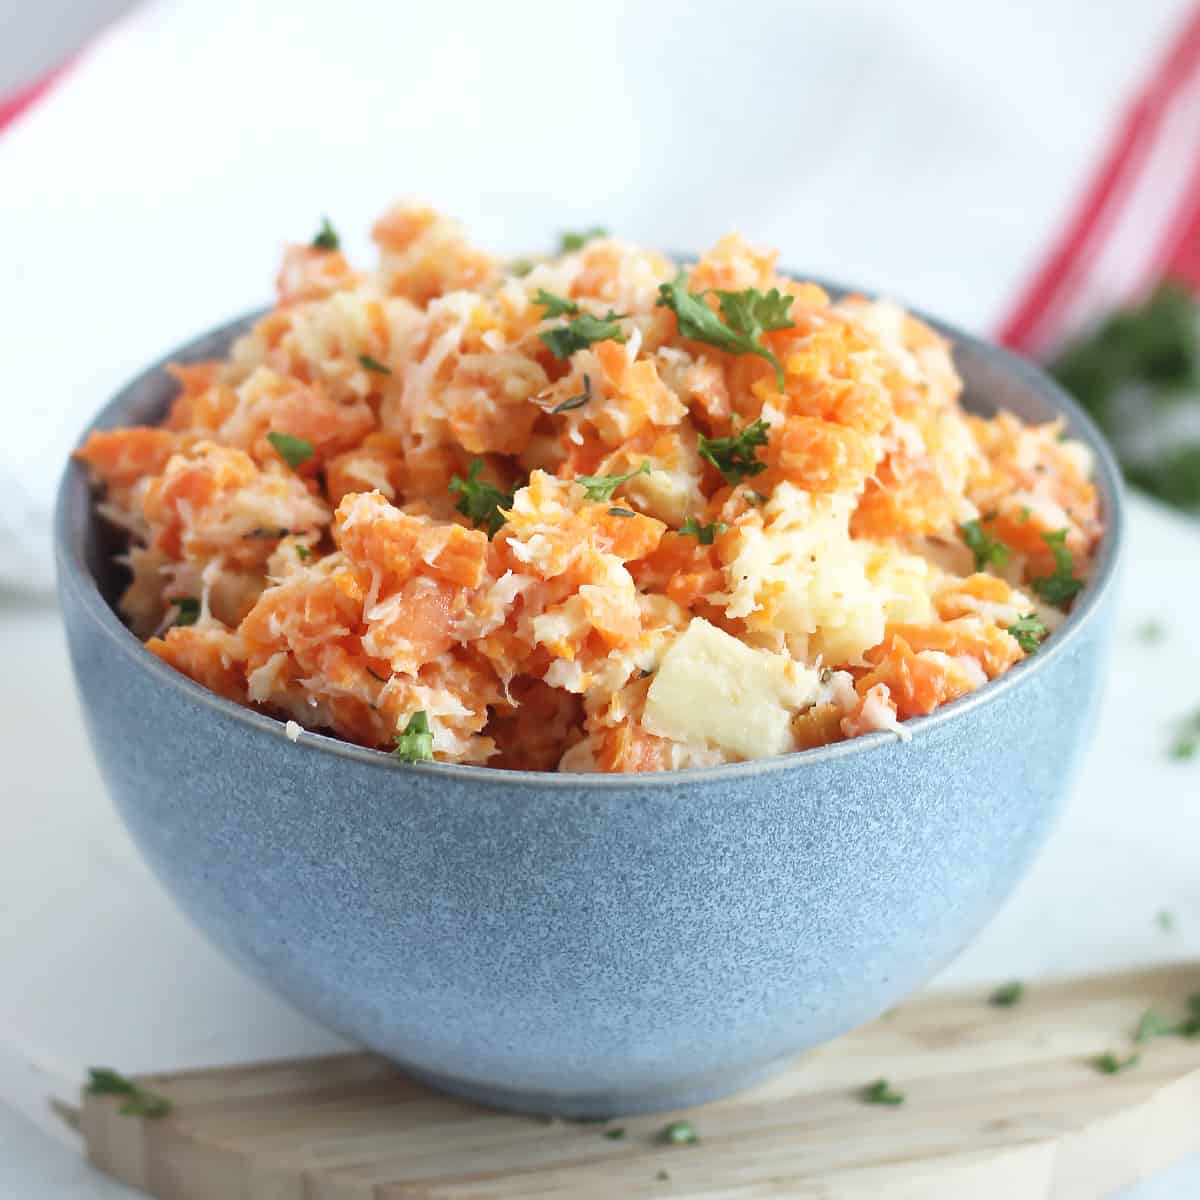 Mashed Carrot and Parsnip Recipe - Bite On The Side